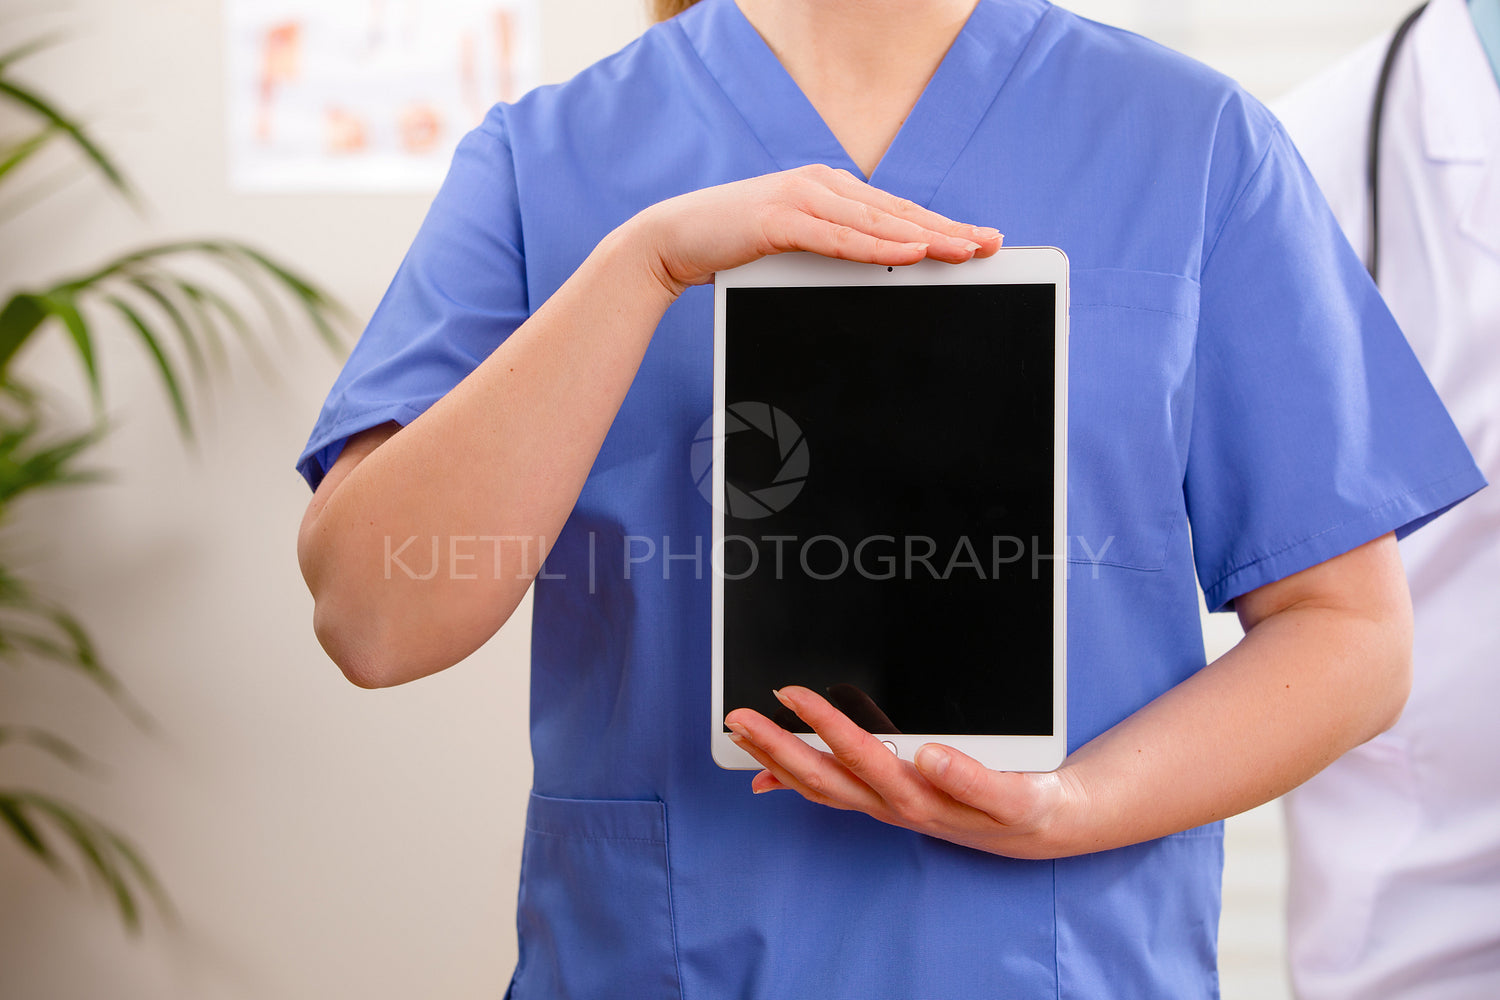 Adult female doctor or nurse showing a digital image or report on a tablet